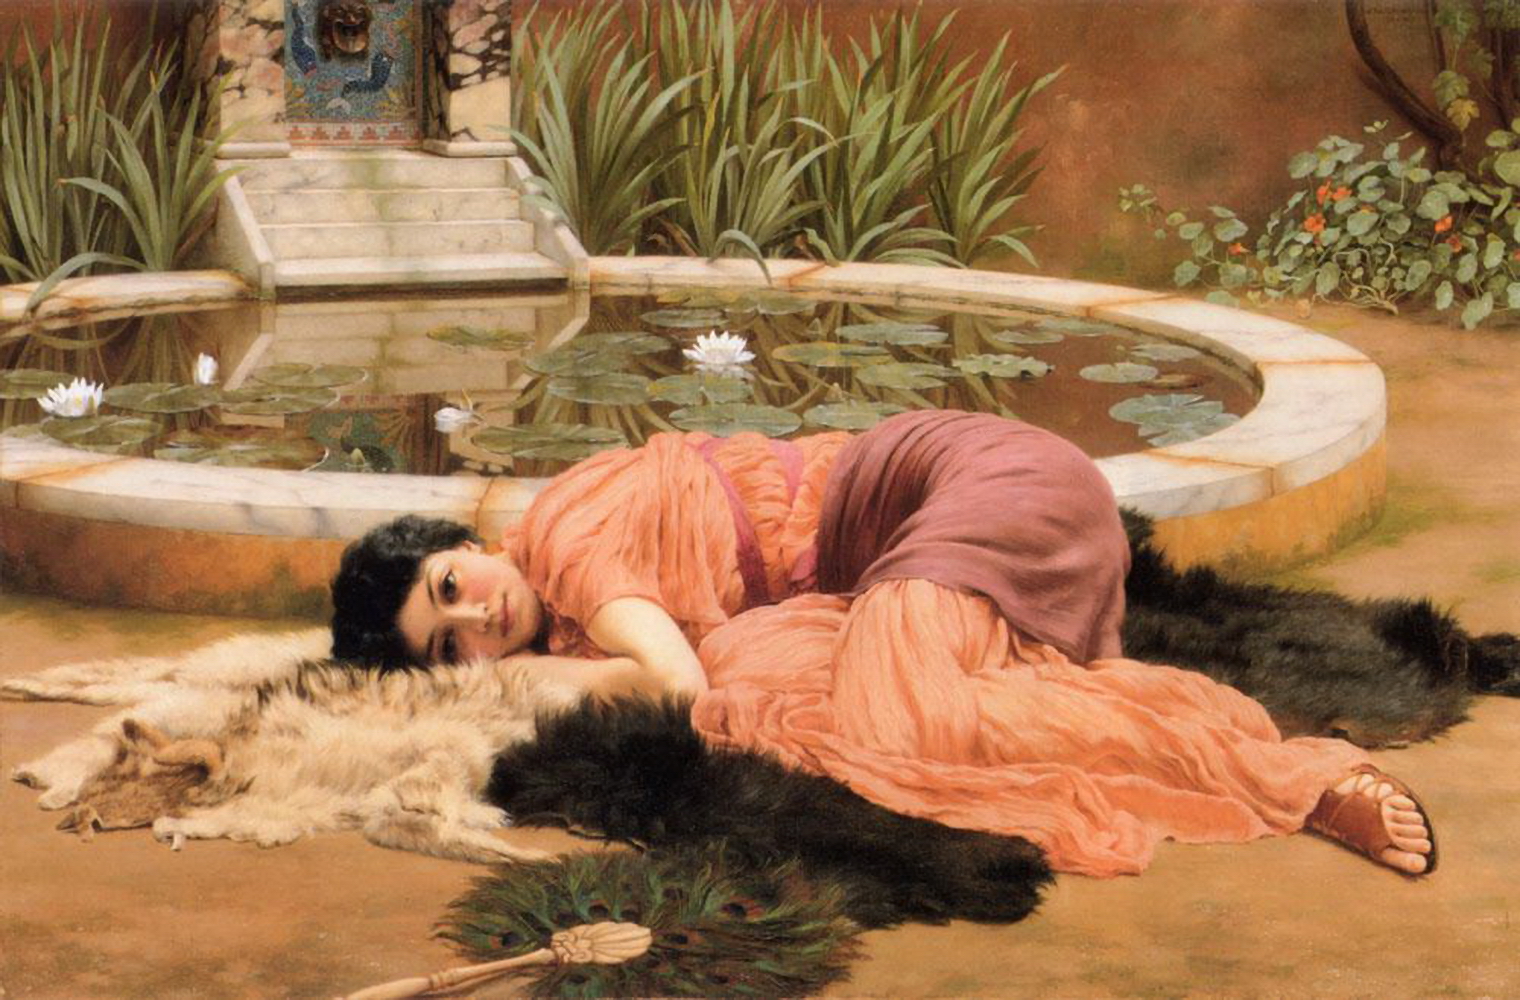 Sweet Nothings by John William Godward - 1904 - - collection privée